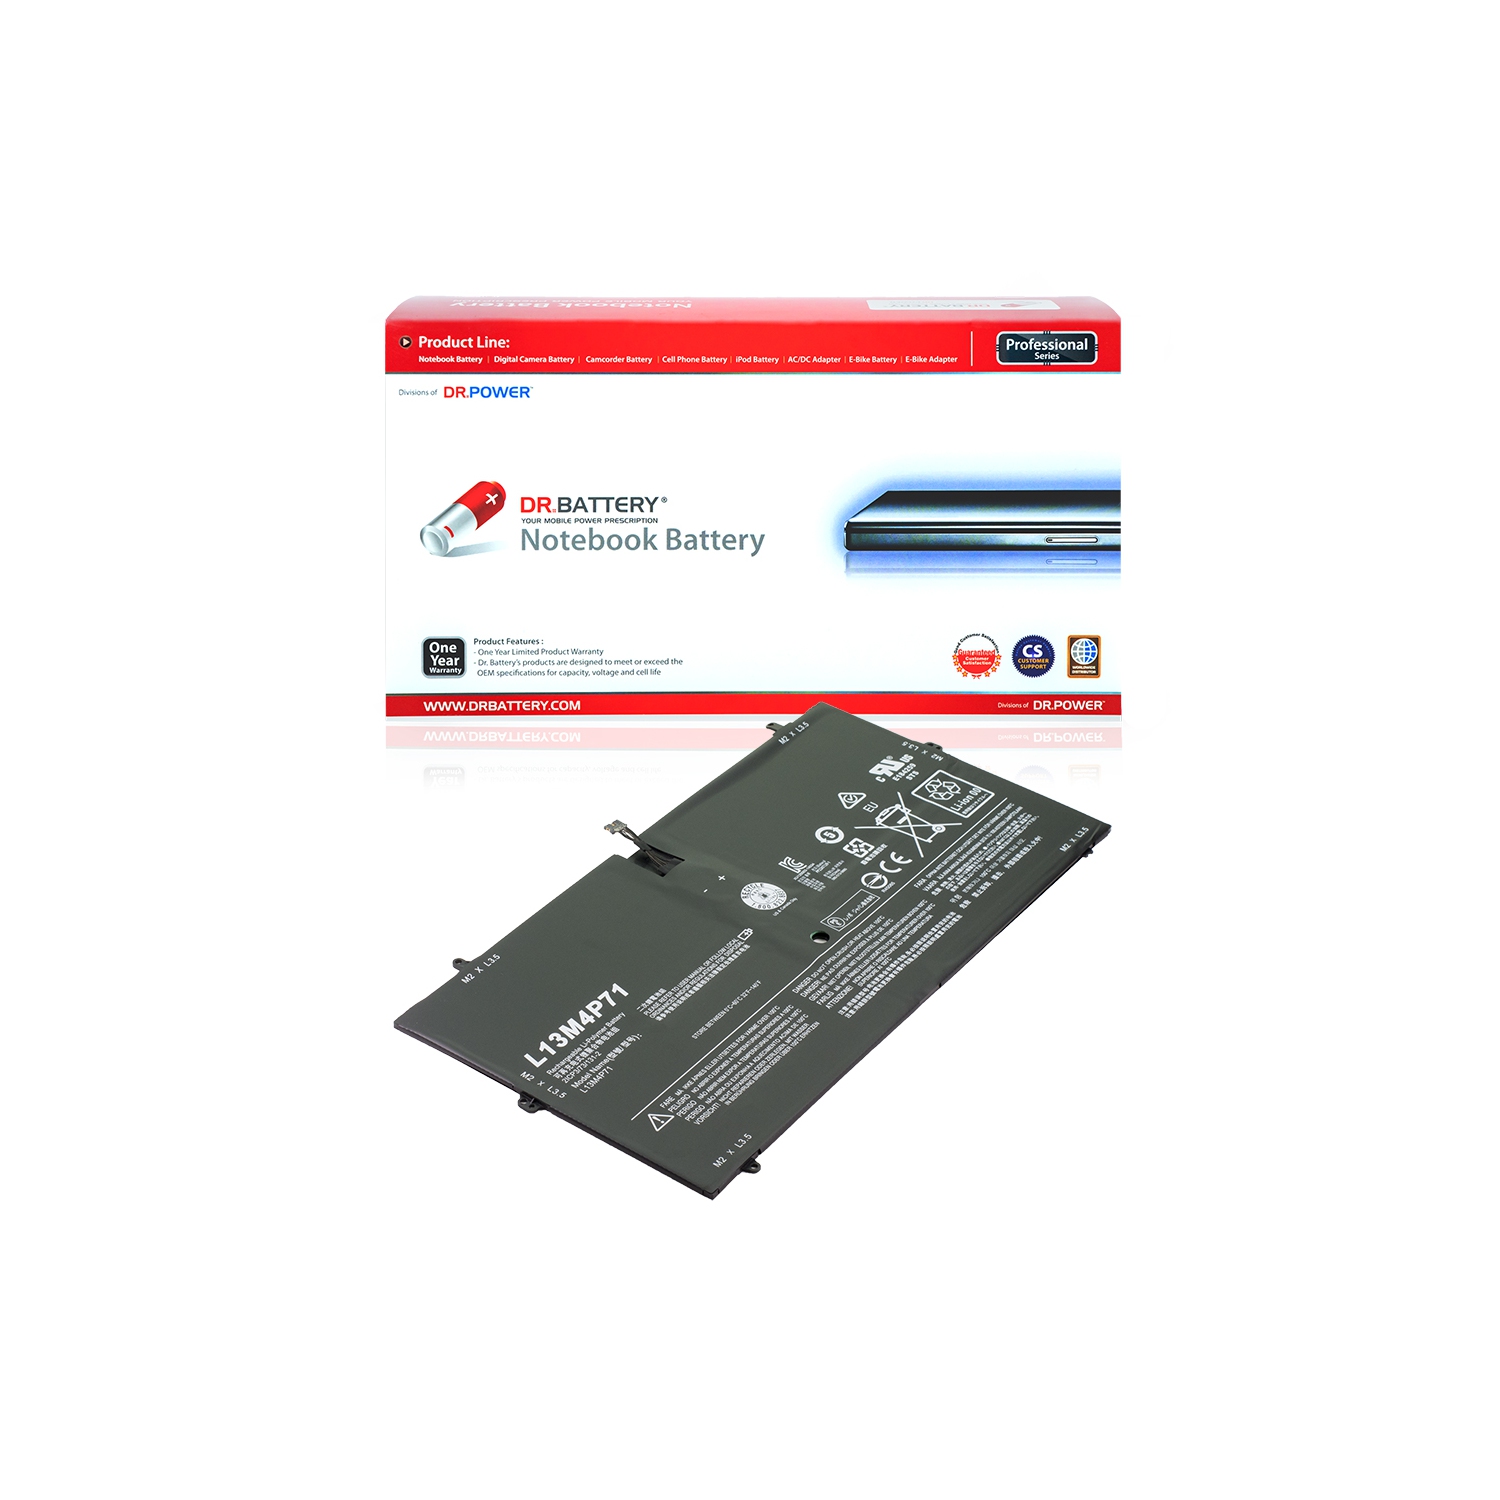 DR. BATTERY - Replacement for Lenovo Yoga 3 Pro-I5Y51 / Pro-I5Y70 / Pro-I5Y70(D) / Pro-I5Y70(F) / L13M4P71 / L14S4P71